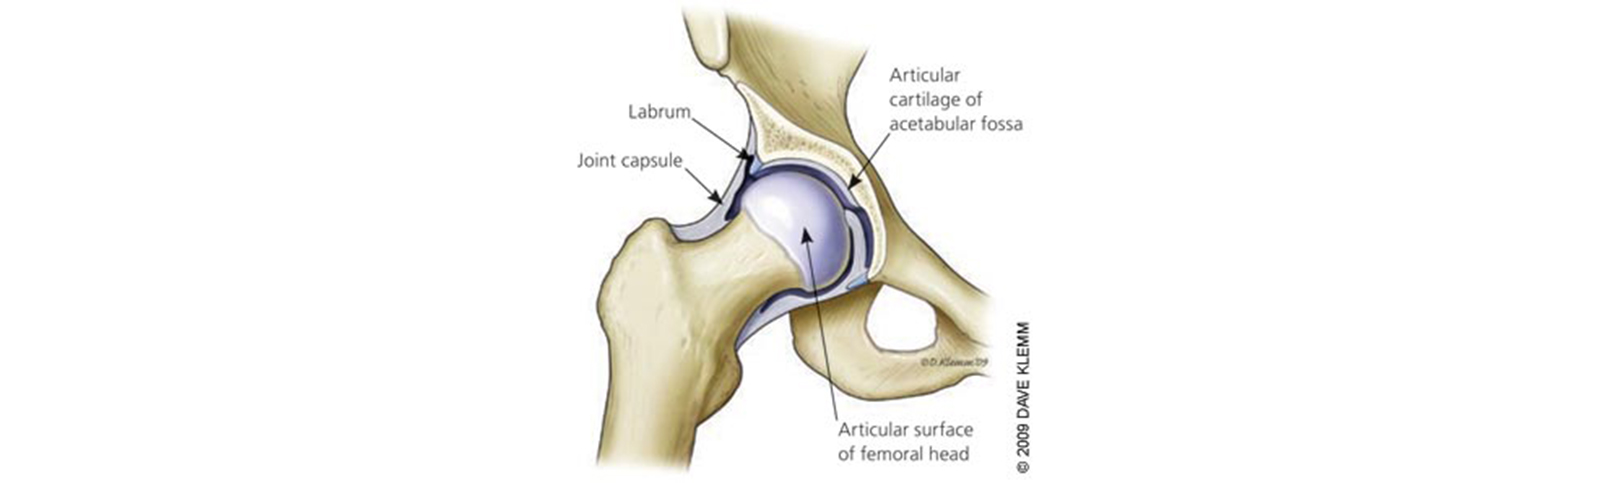 Hip joint image